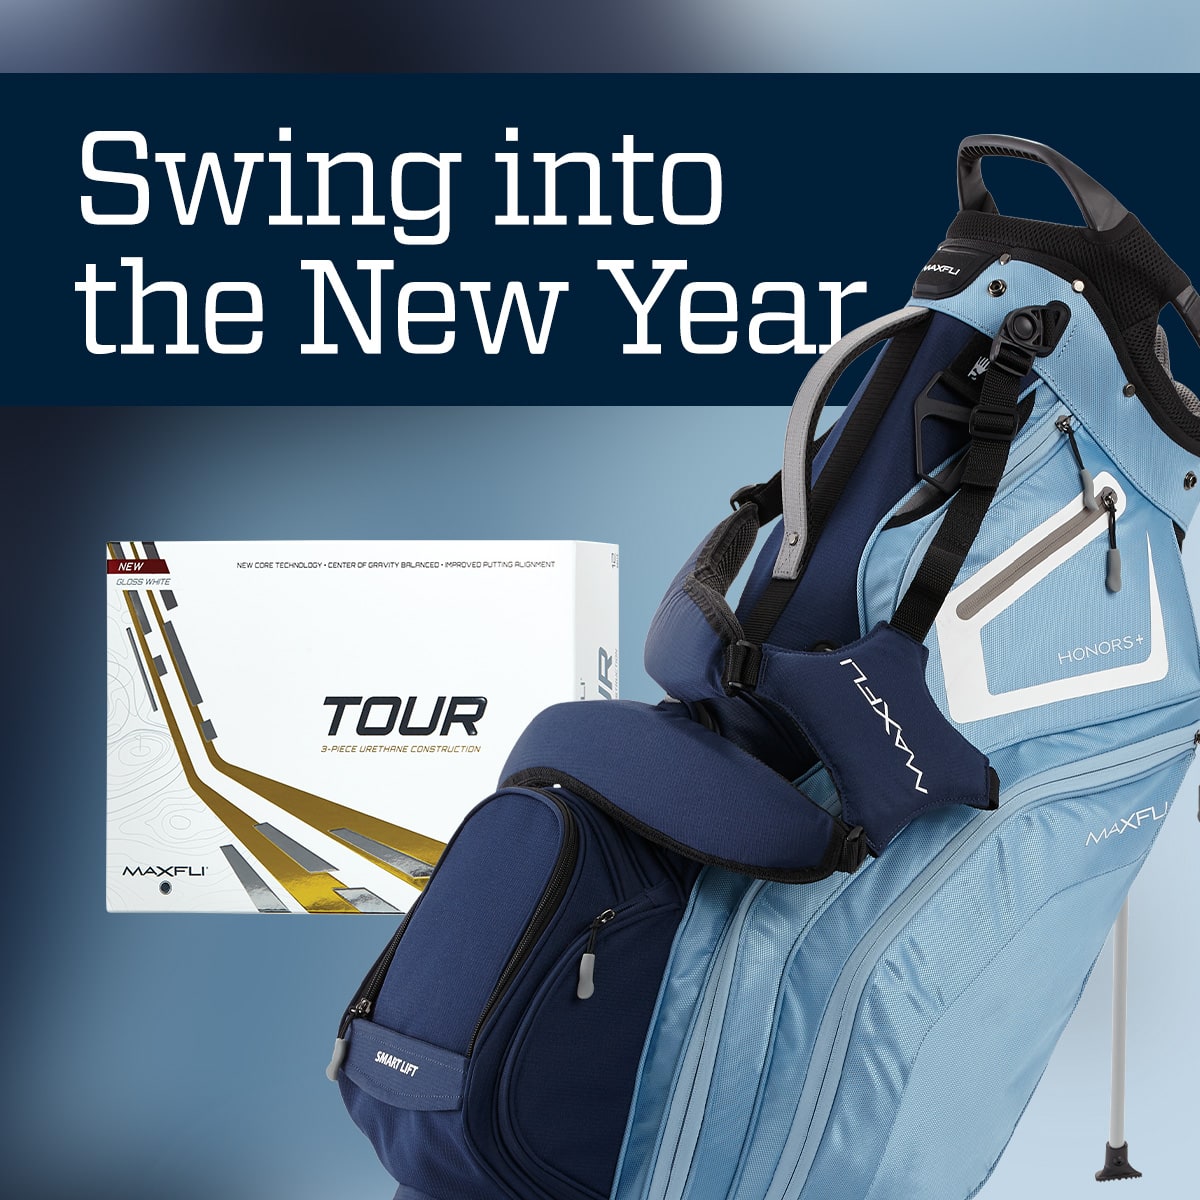 Swing into the new year.